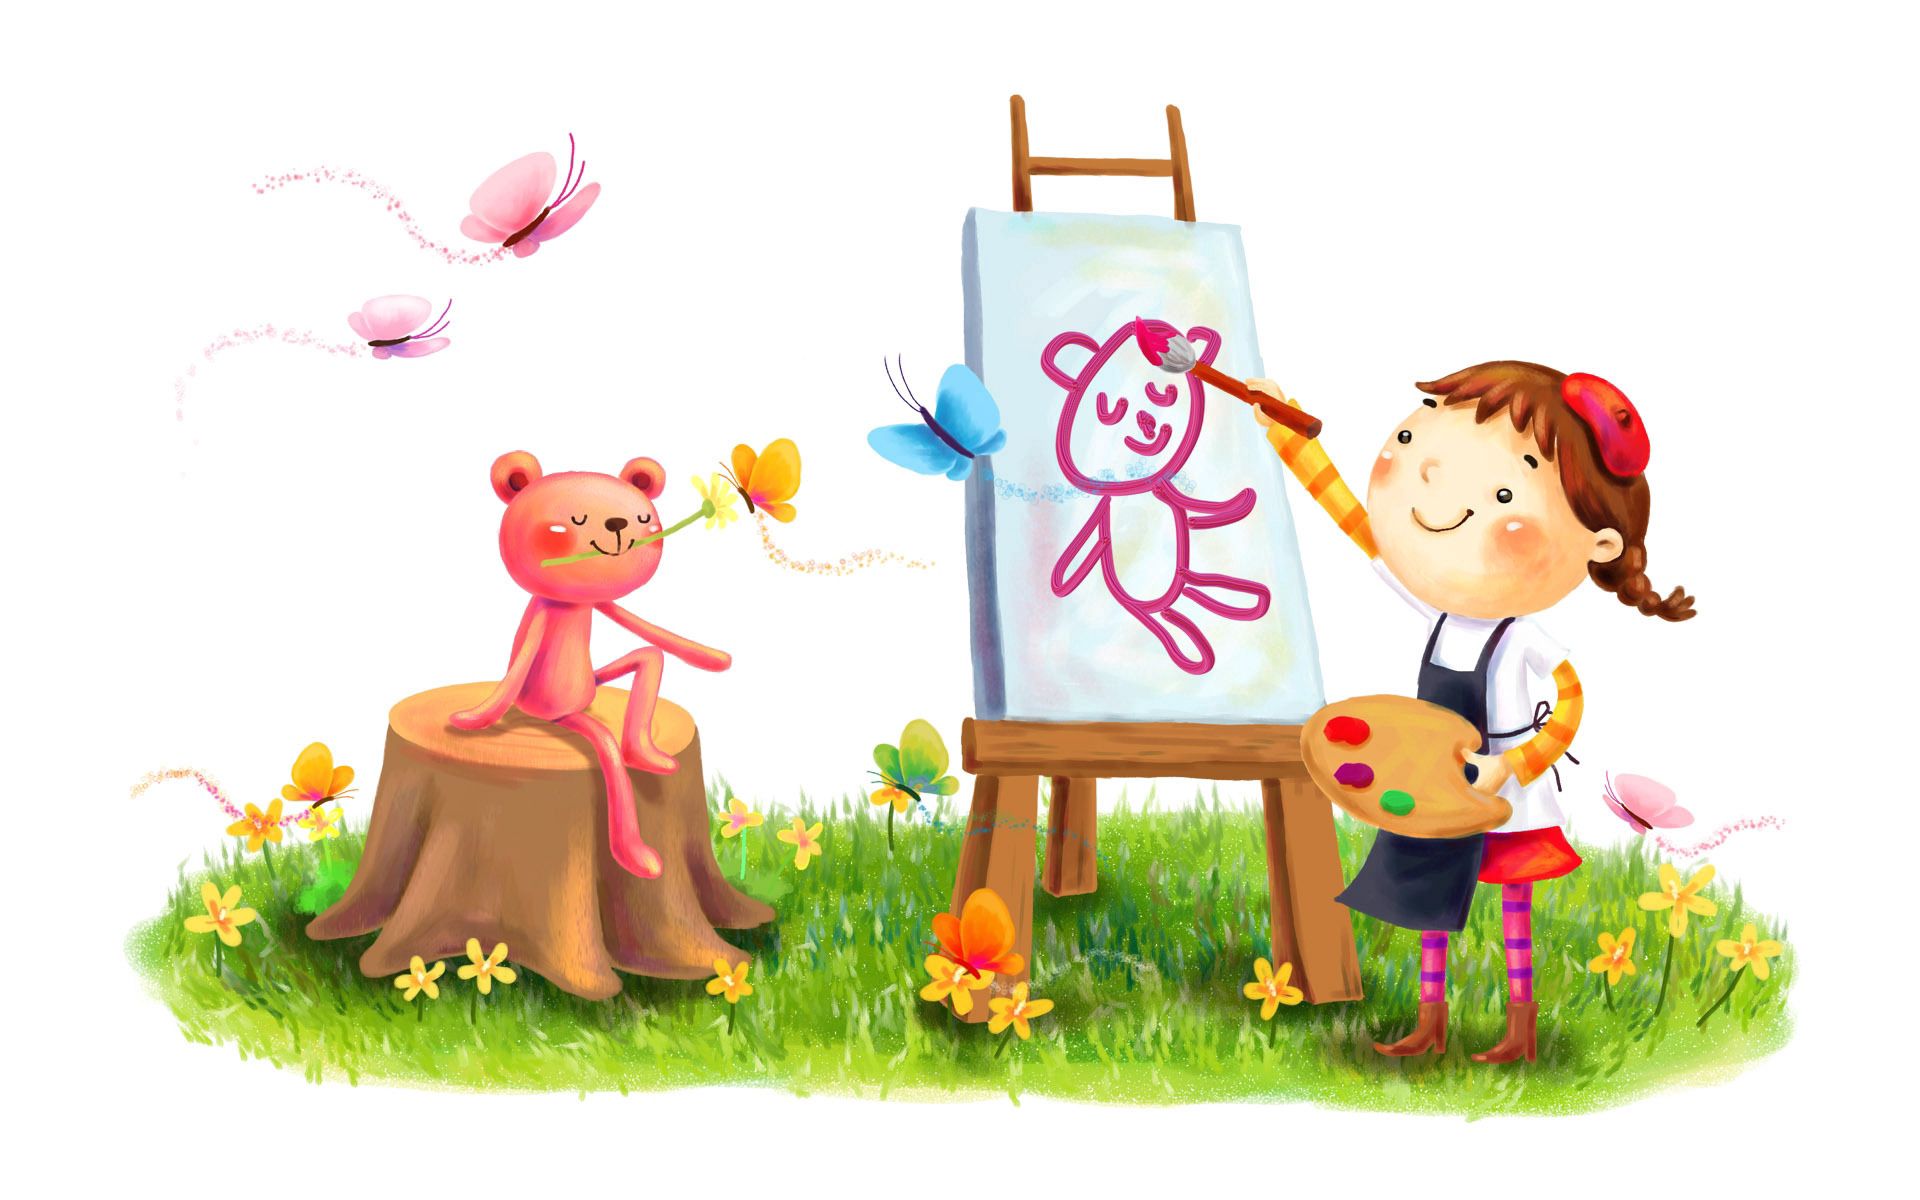 butterflies, flowers, summer, miscellanea, miscellaneous, picture, drawing, smile, girl, animal, beast, lawn, painting, paints, brush